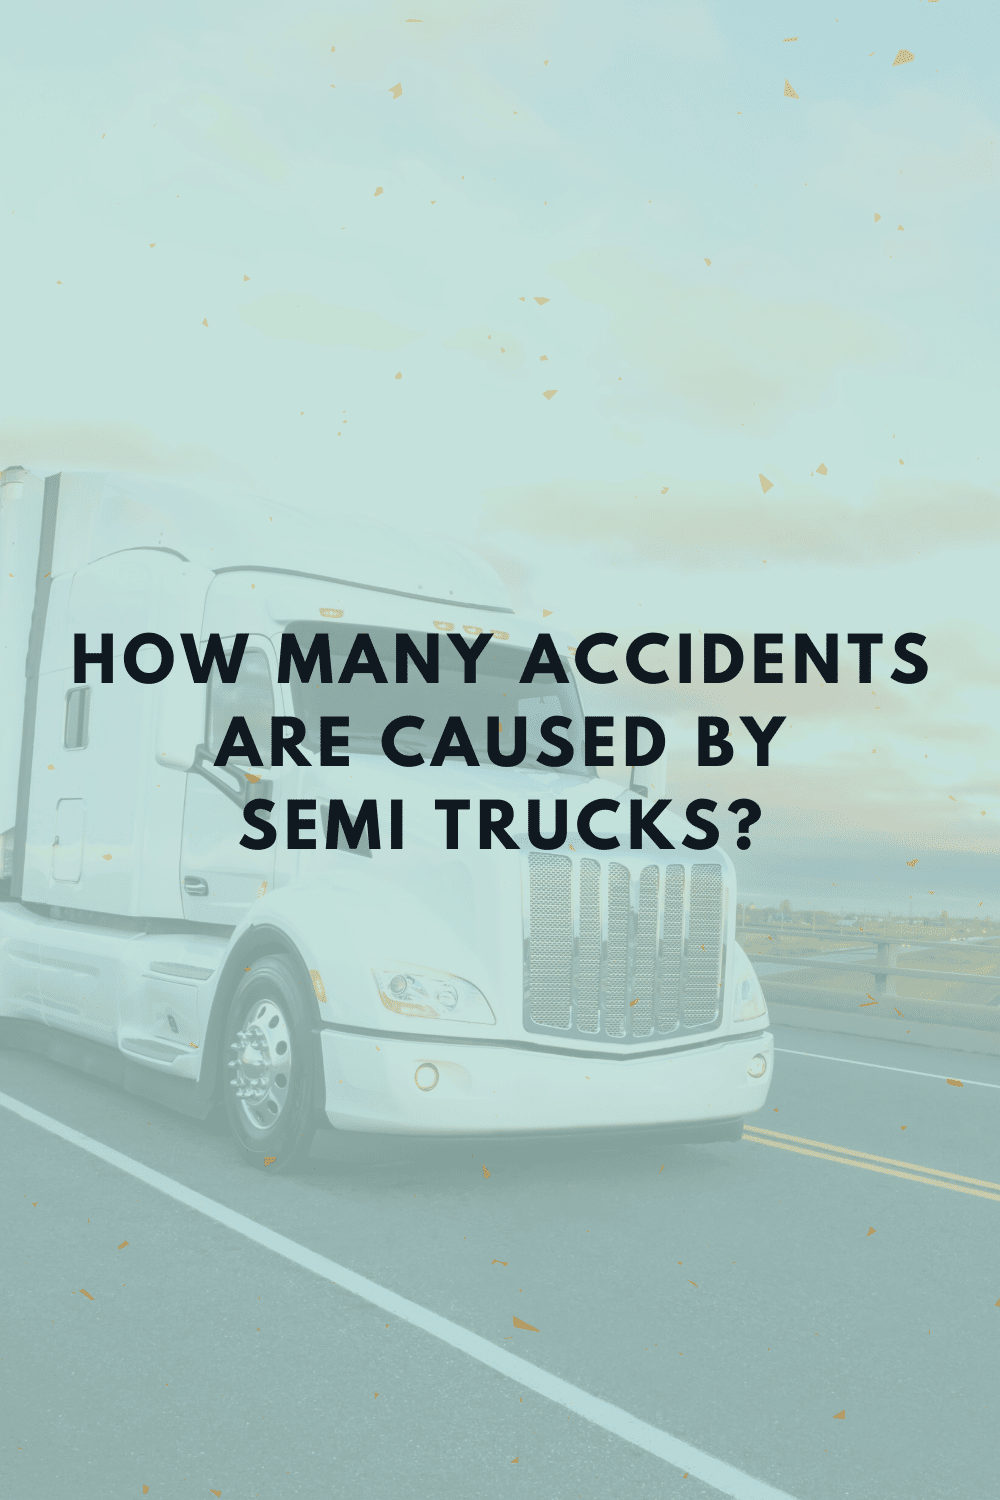 How Many Accidents Are Caused By Semi Trucks?